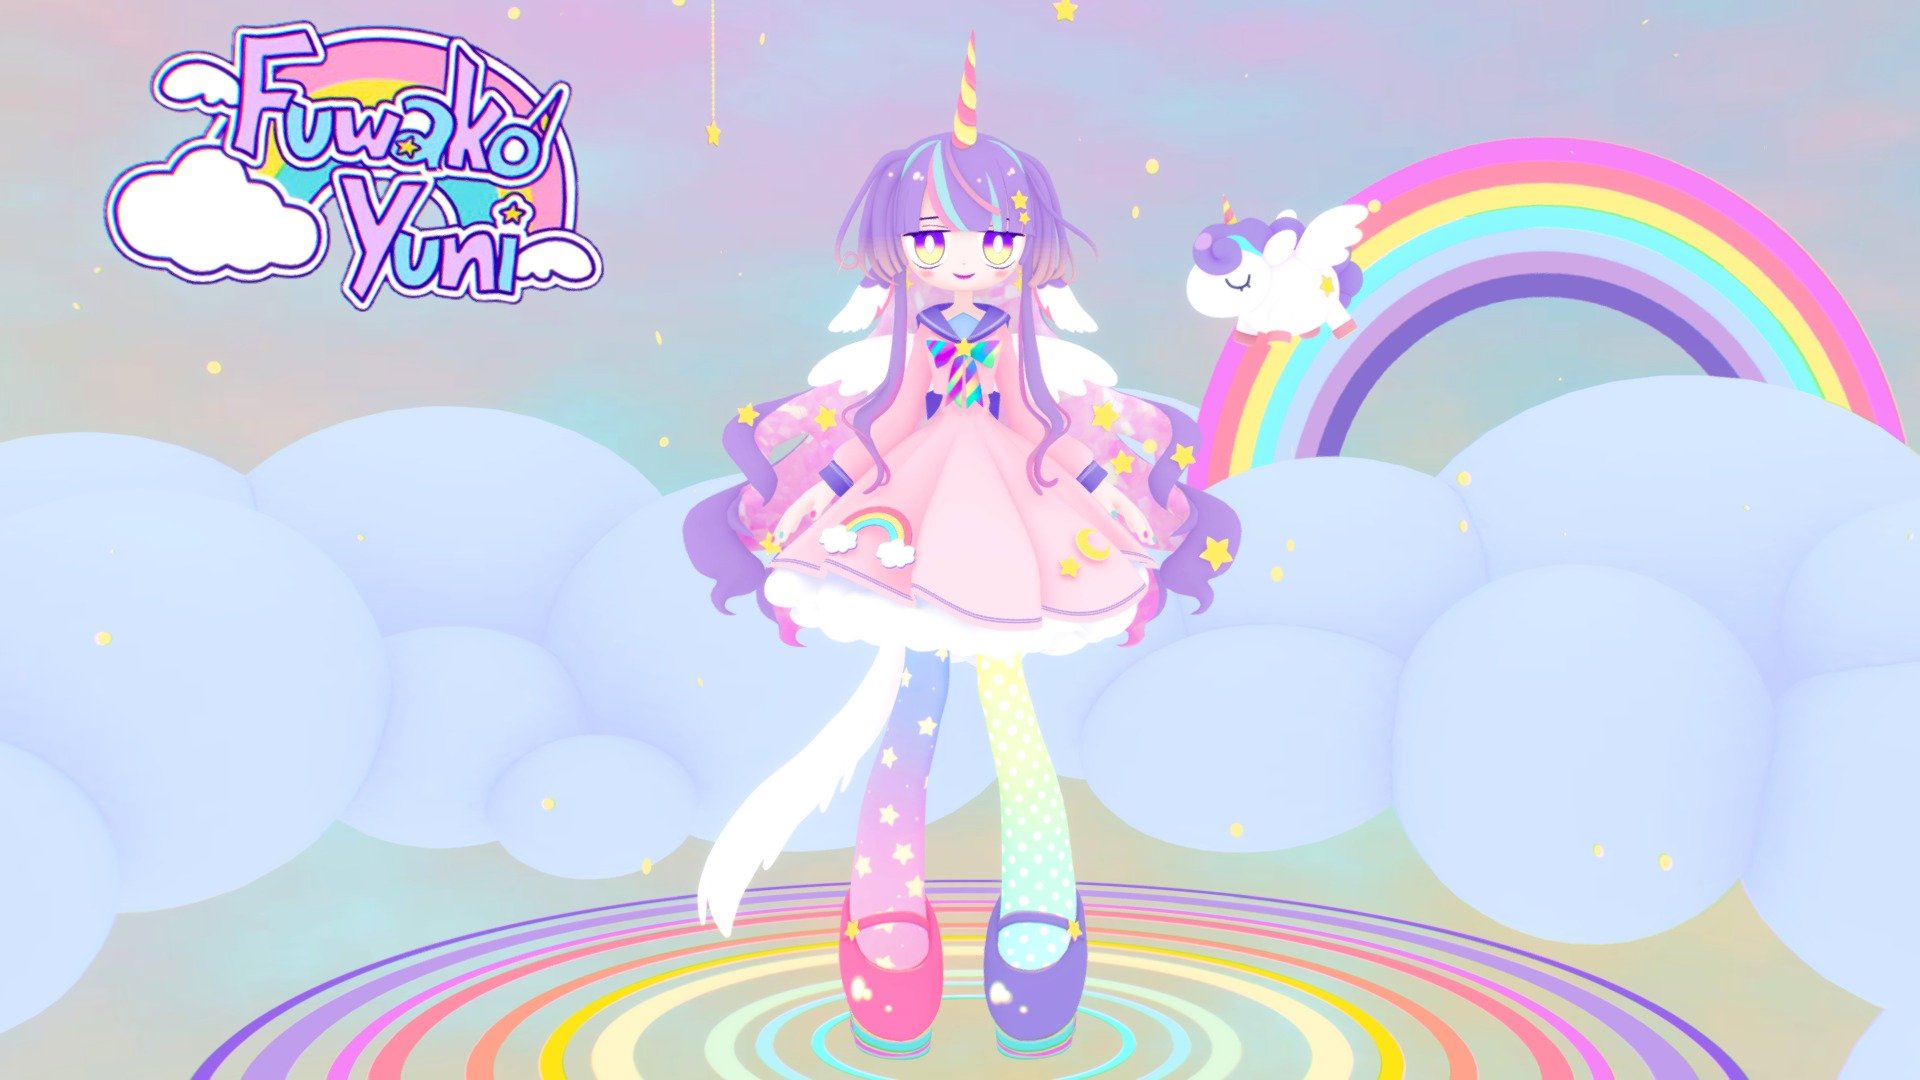 Here is a model based on the adorable VTuber Fuwako Yuni!🦄

Here are the links!

https://fuwakoyuni.carrd.co/

Youtube: https://www.youtube.com/channel/UCHYwIwzpWS-LyCQa8W-eJuw

Twitter: https://twitter.com/FuwakoYuni

She's just so cute~ 💜
I love the design, the personality and the atmosphere!✨

Can't wait to see more of their content~ - 🌈~ Fuwako Yuni ~ 🦄 - 3D model by Ellie DB (@elliedb) 3d model